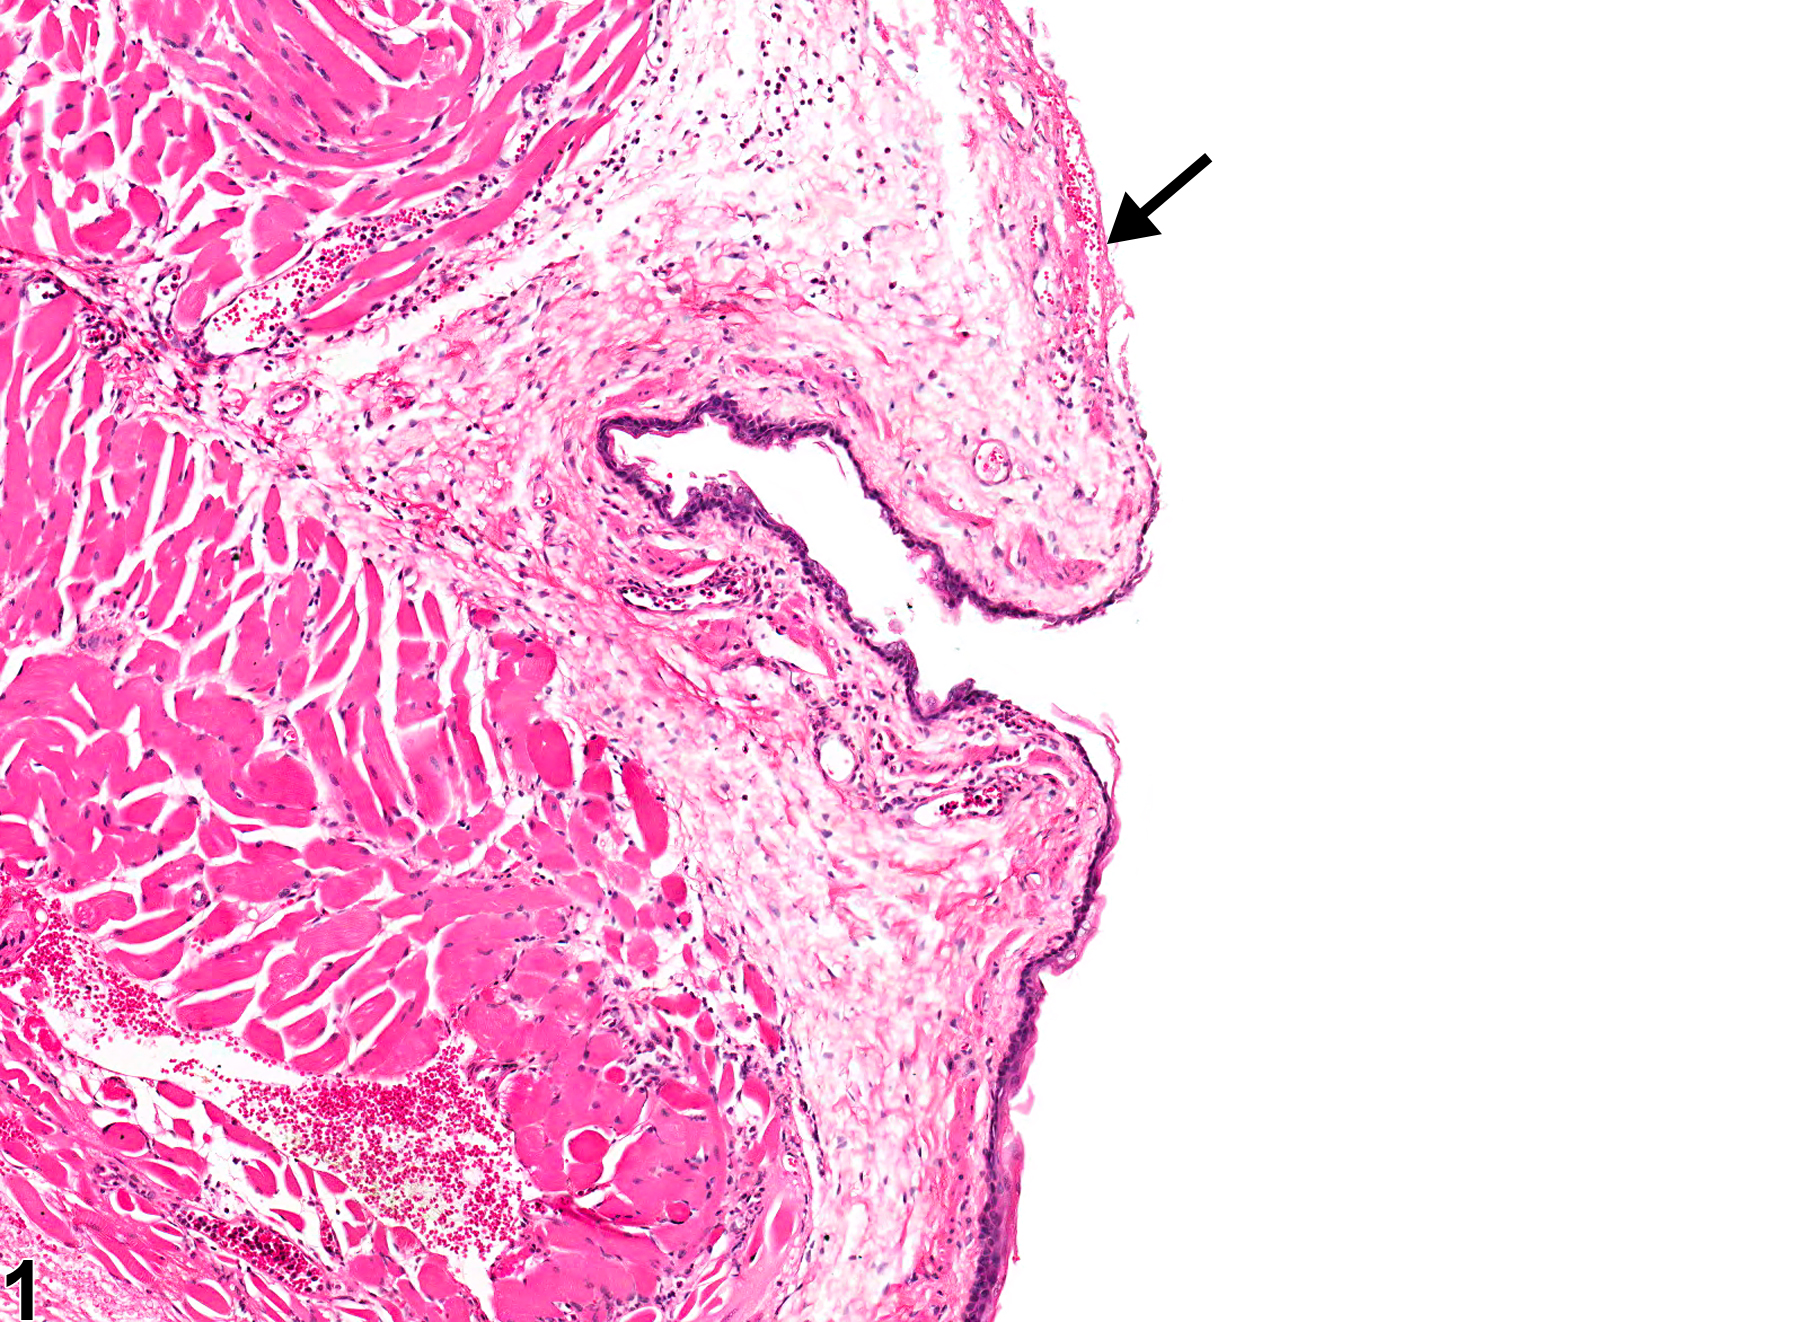 Image of ulcer in the esophagus from a female F344/N rat in a chronic study